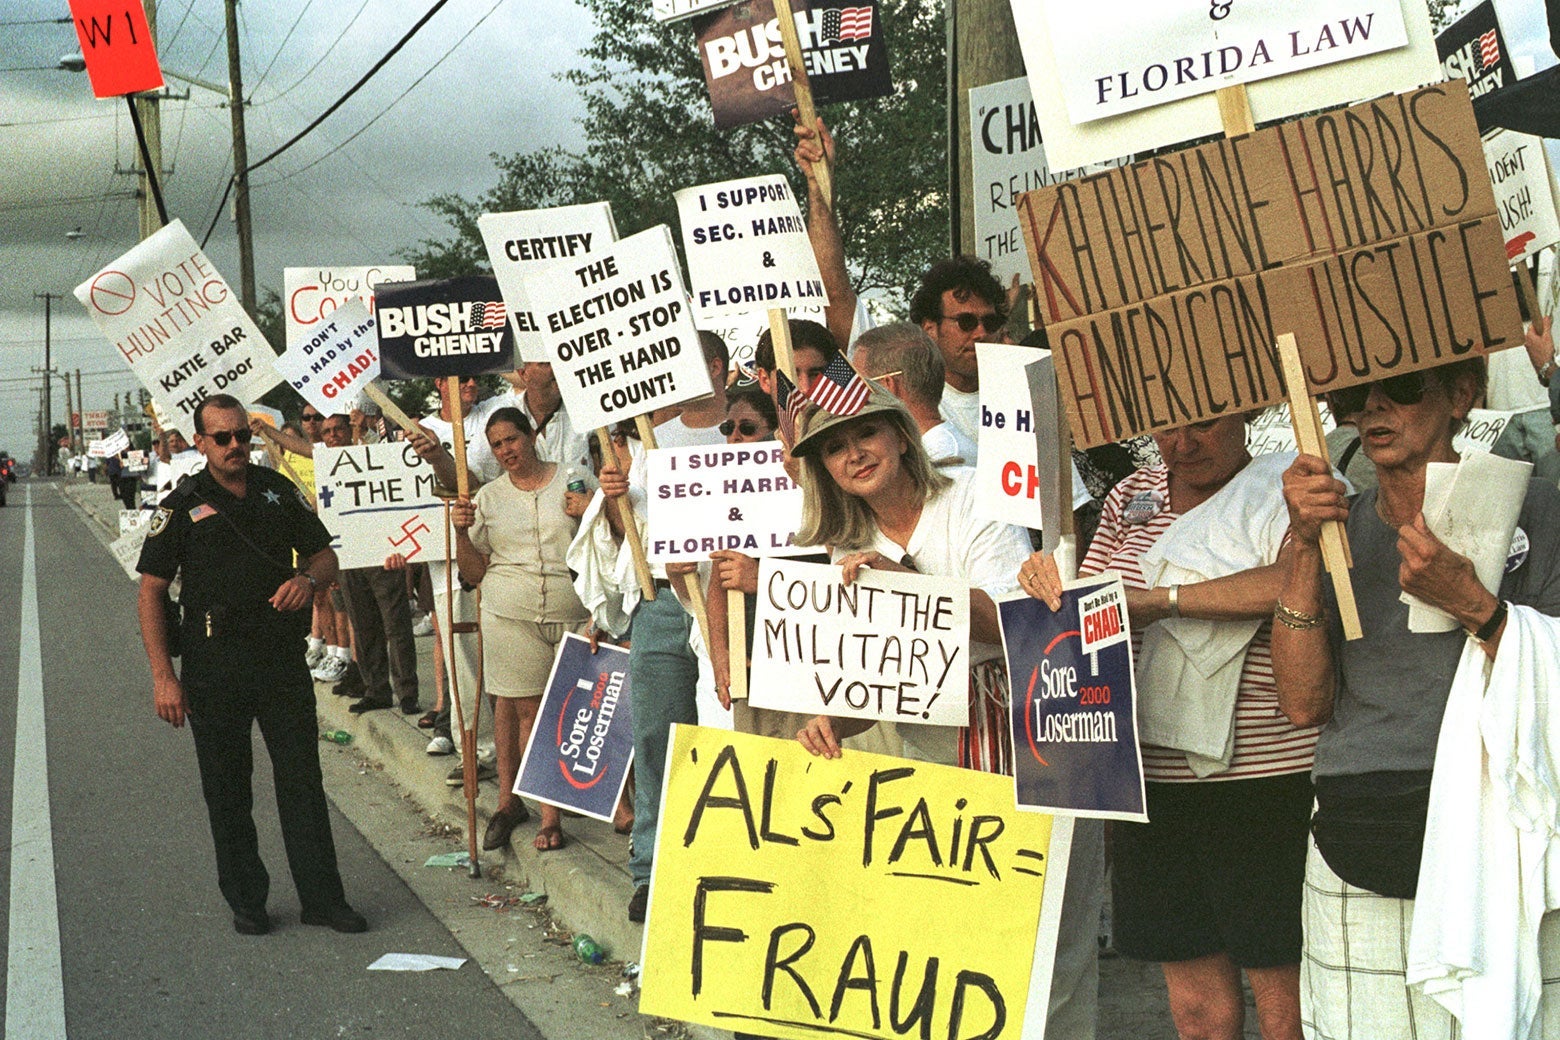 Protesters outside the Palm Beach County Emergency Operations Center on November 18, 2000 in West Palm Beach, Florida.